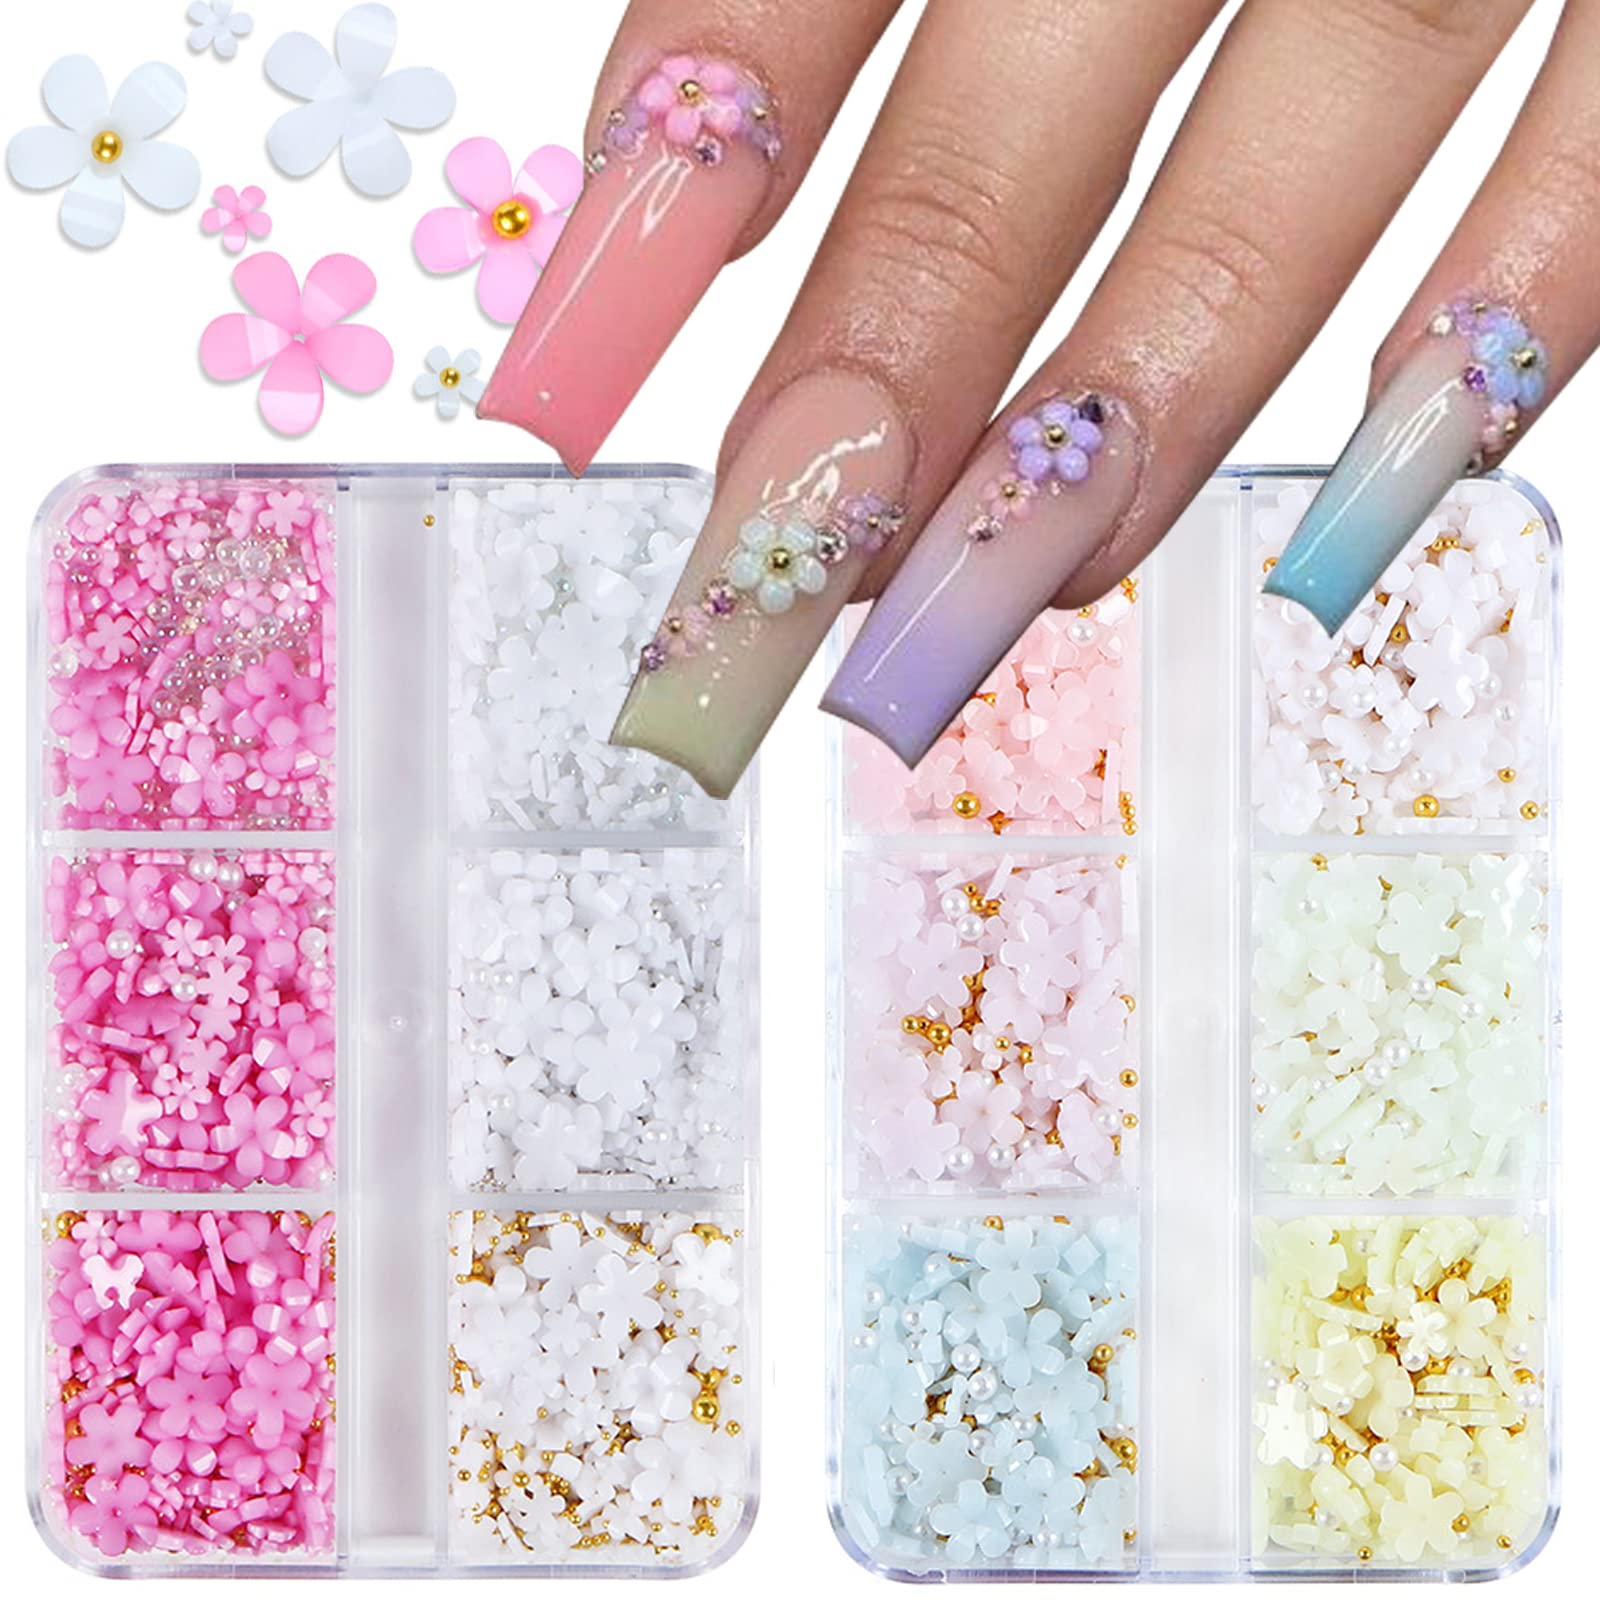 3D Flower Nail Charms, 2 Boxes 3D Acrylic Flower Nail Art